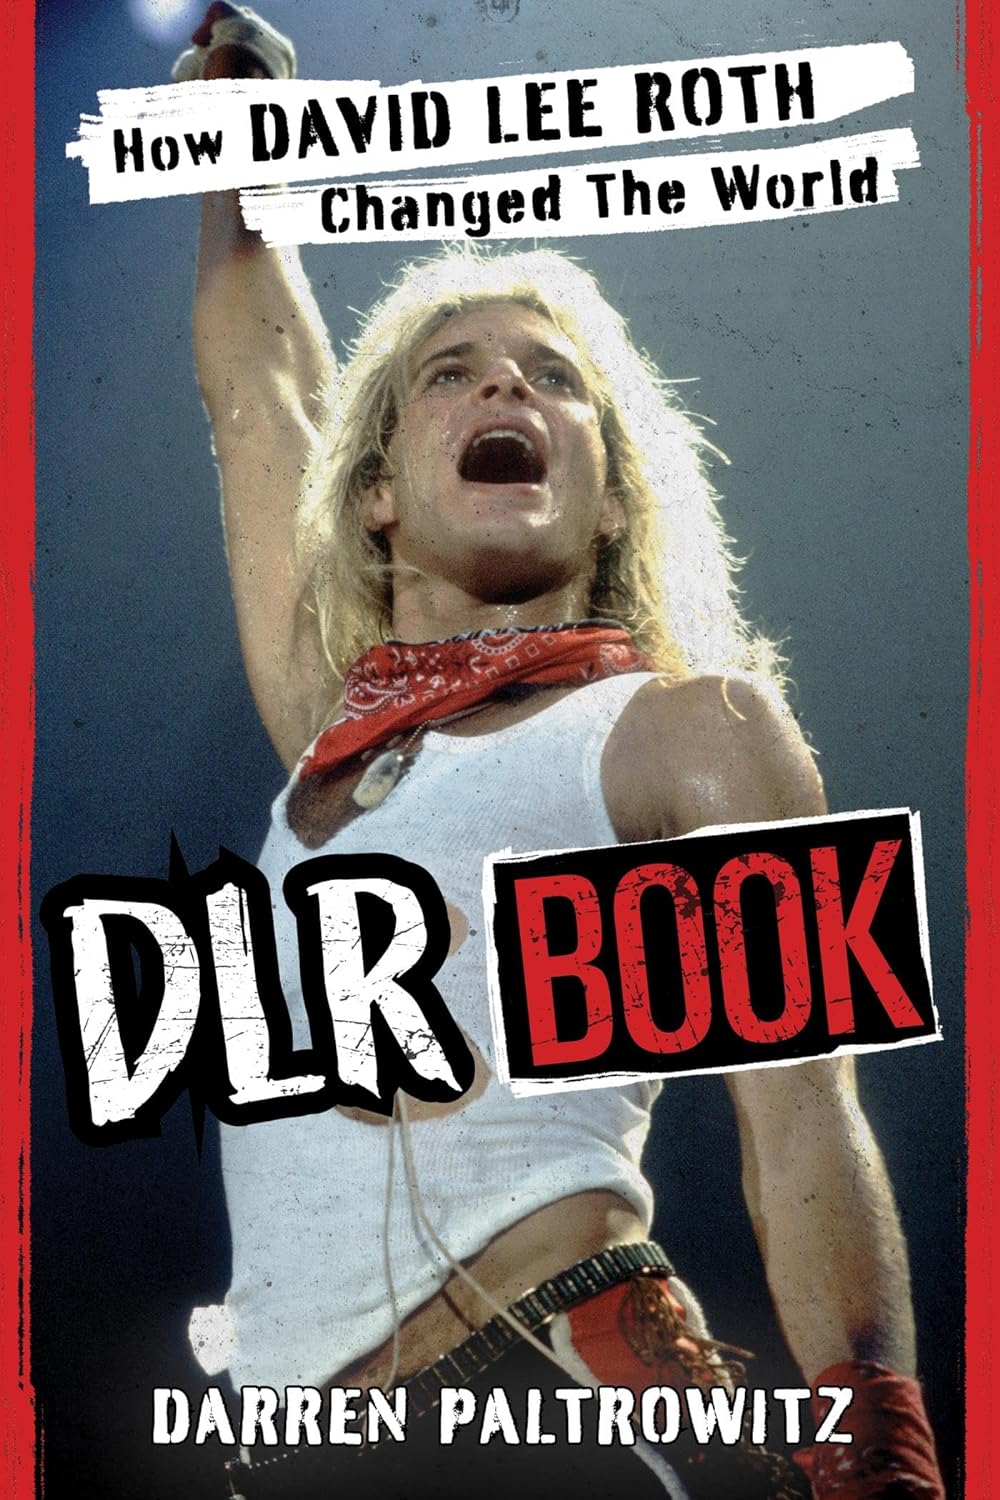 cover of the DLR Book featuring David Lee Roth singing